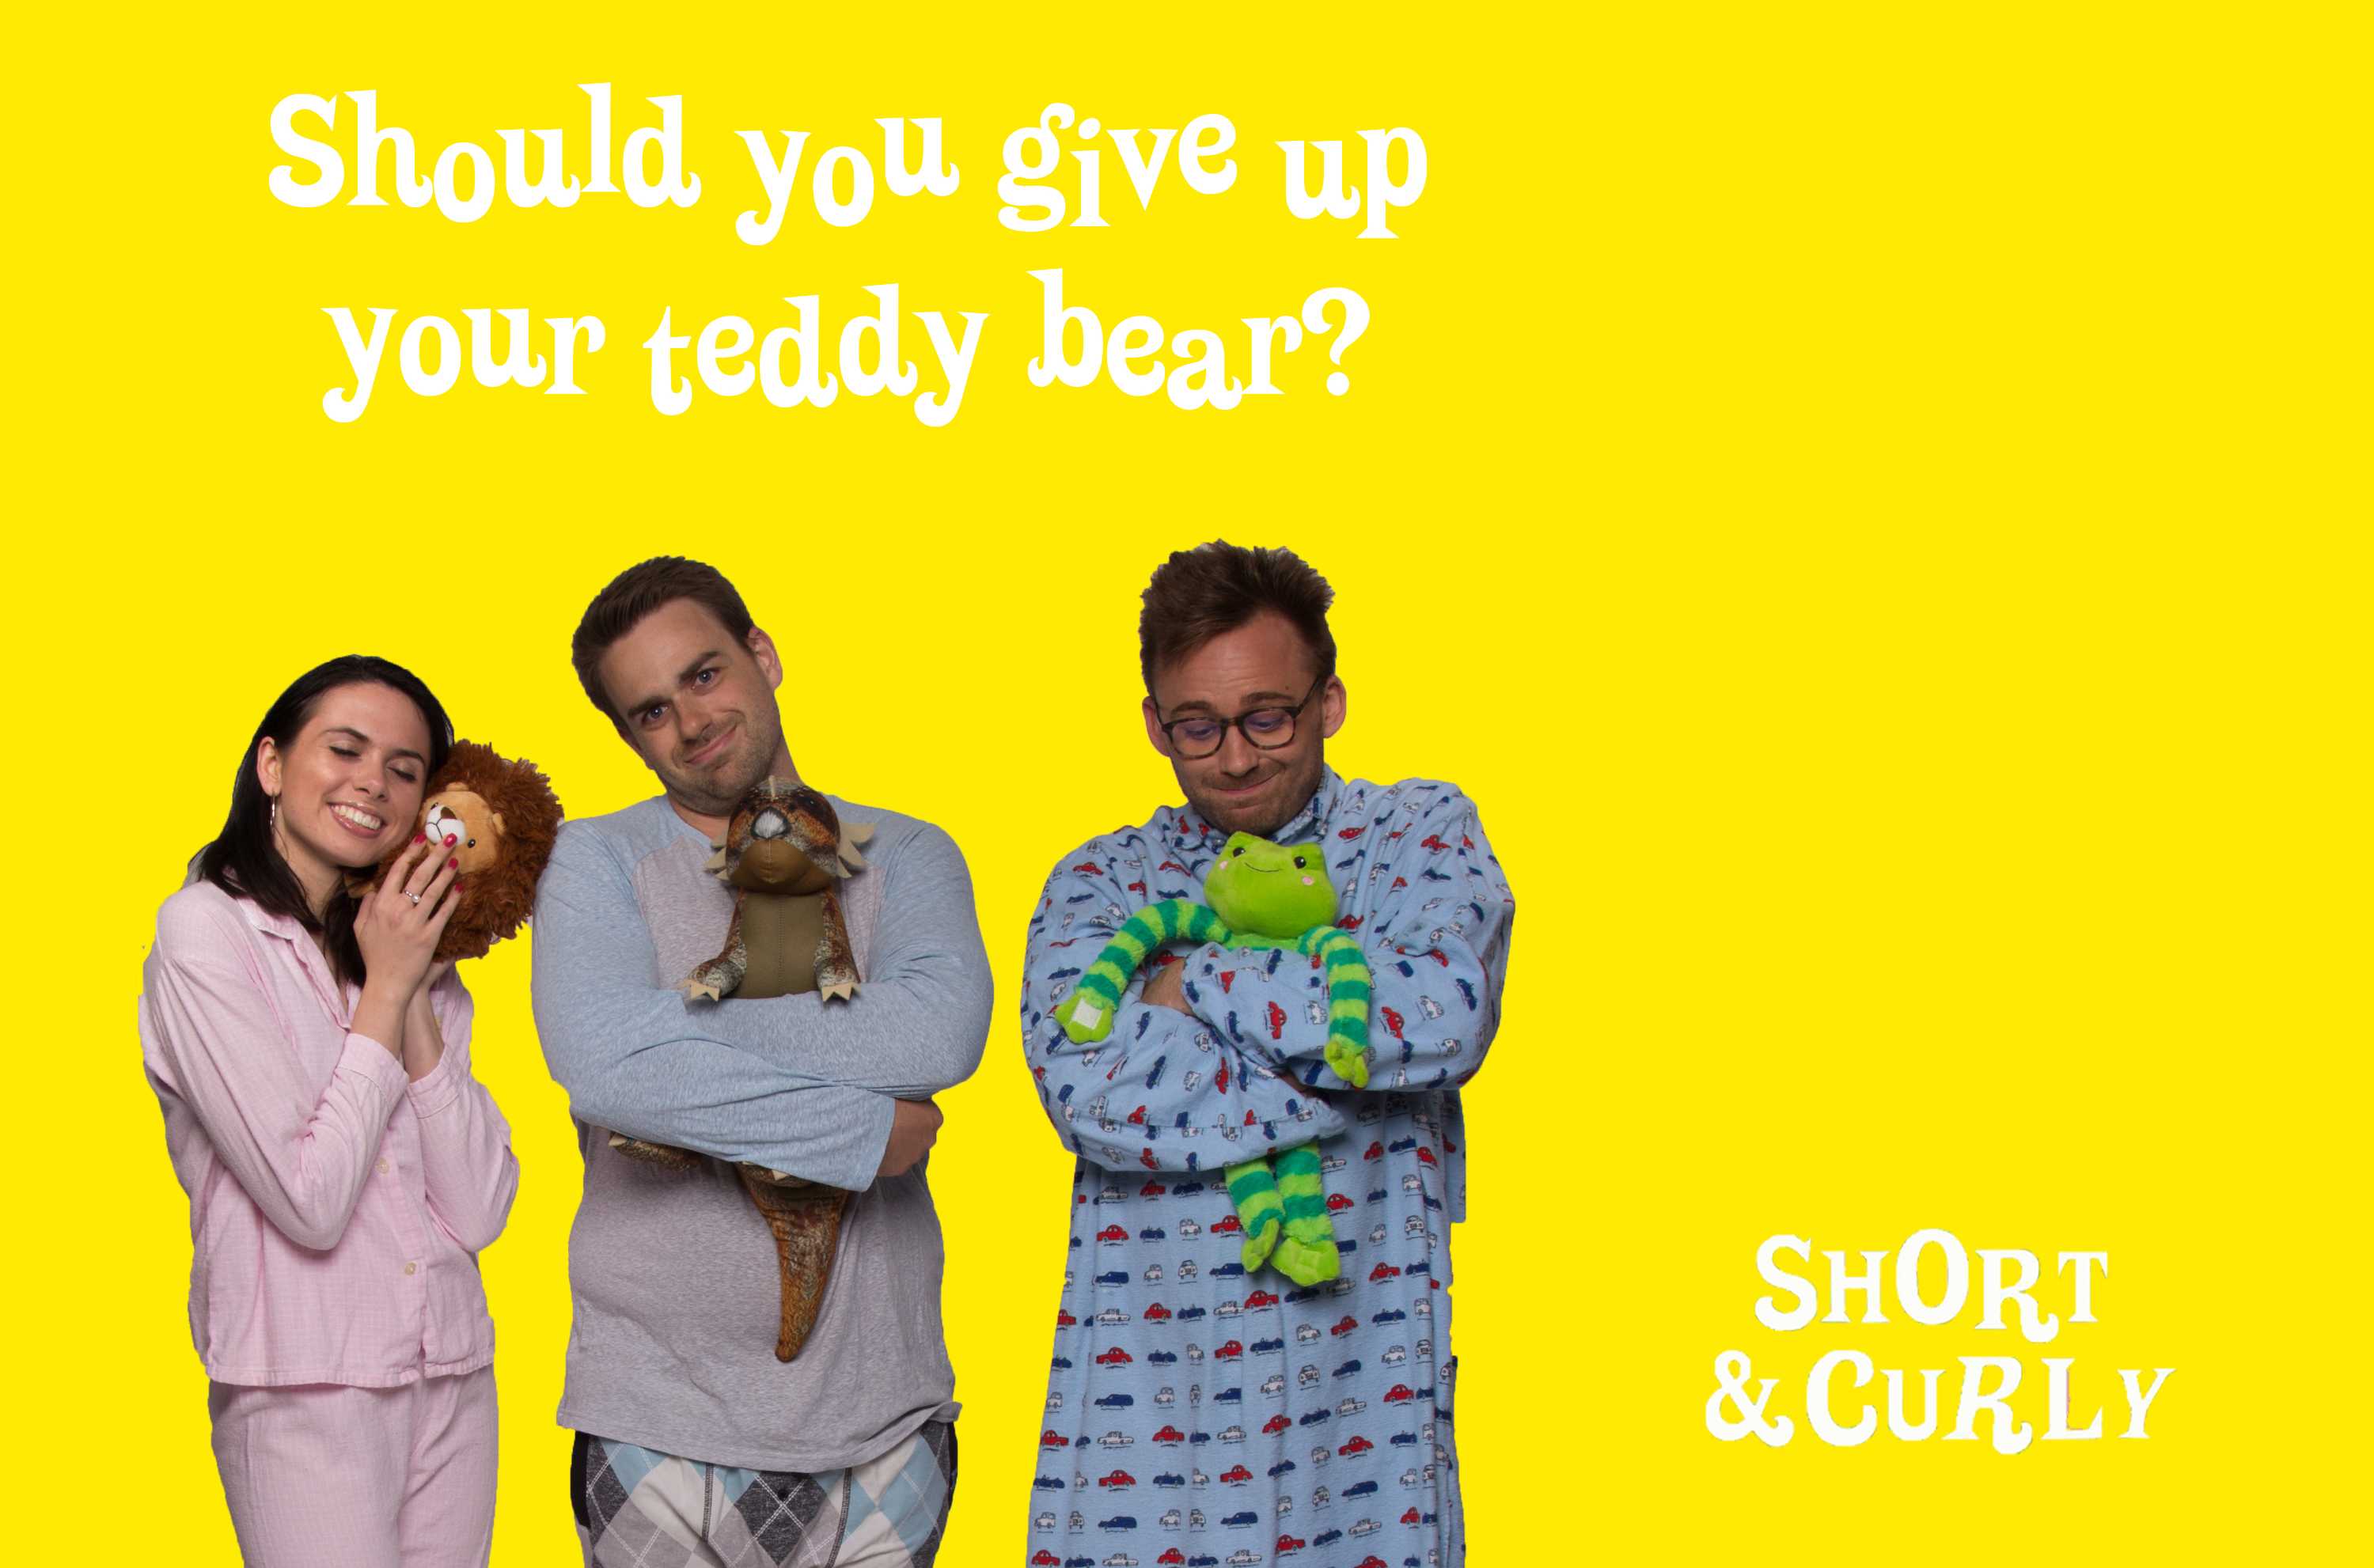 Should you give up your teddy bear?